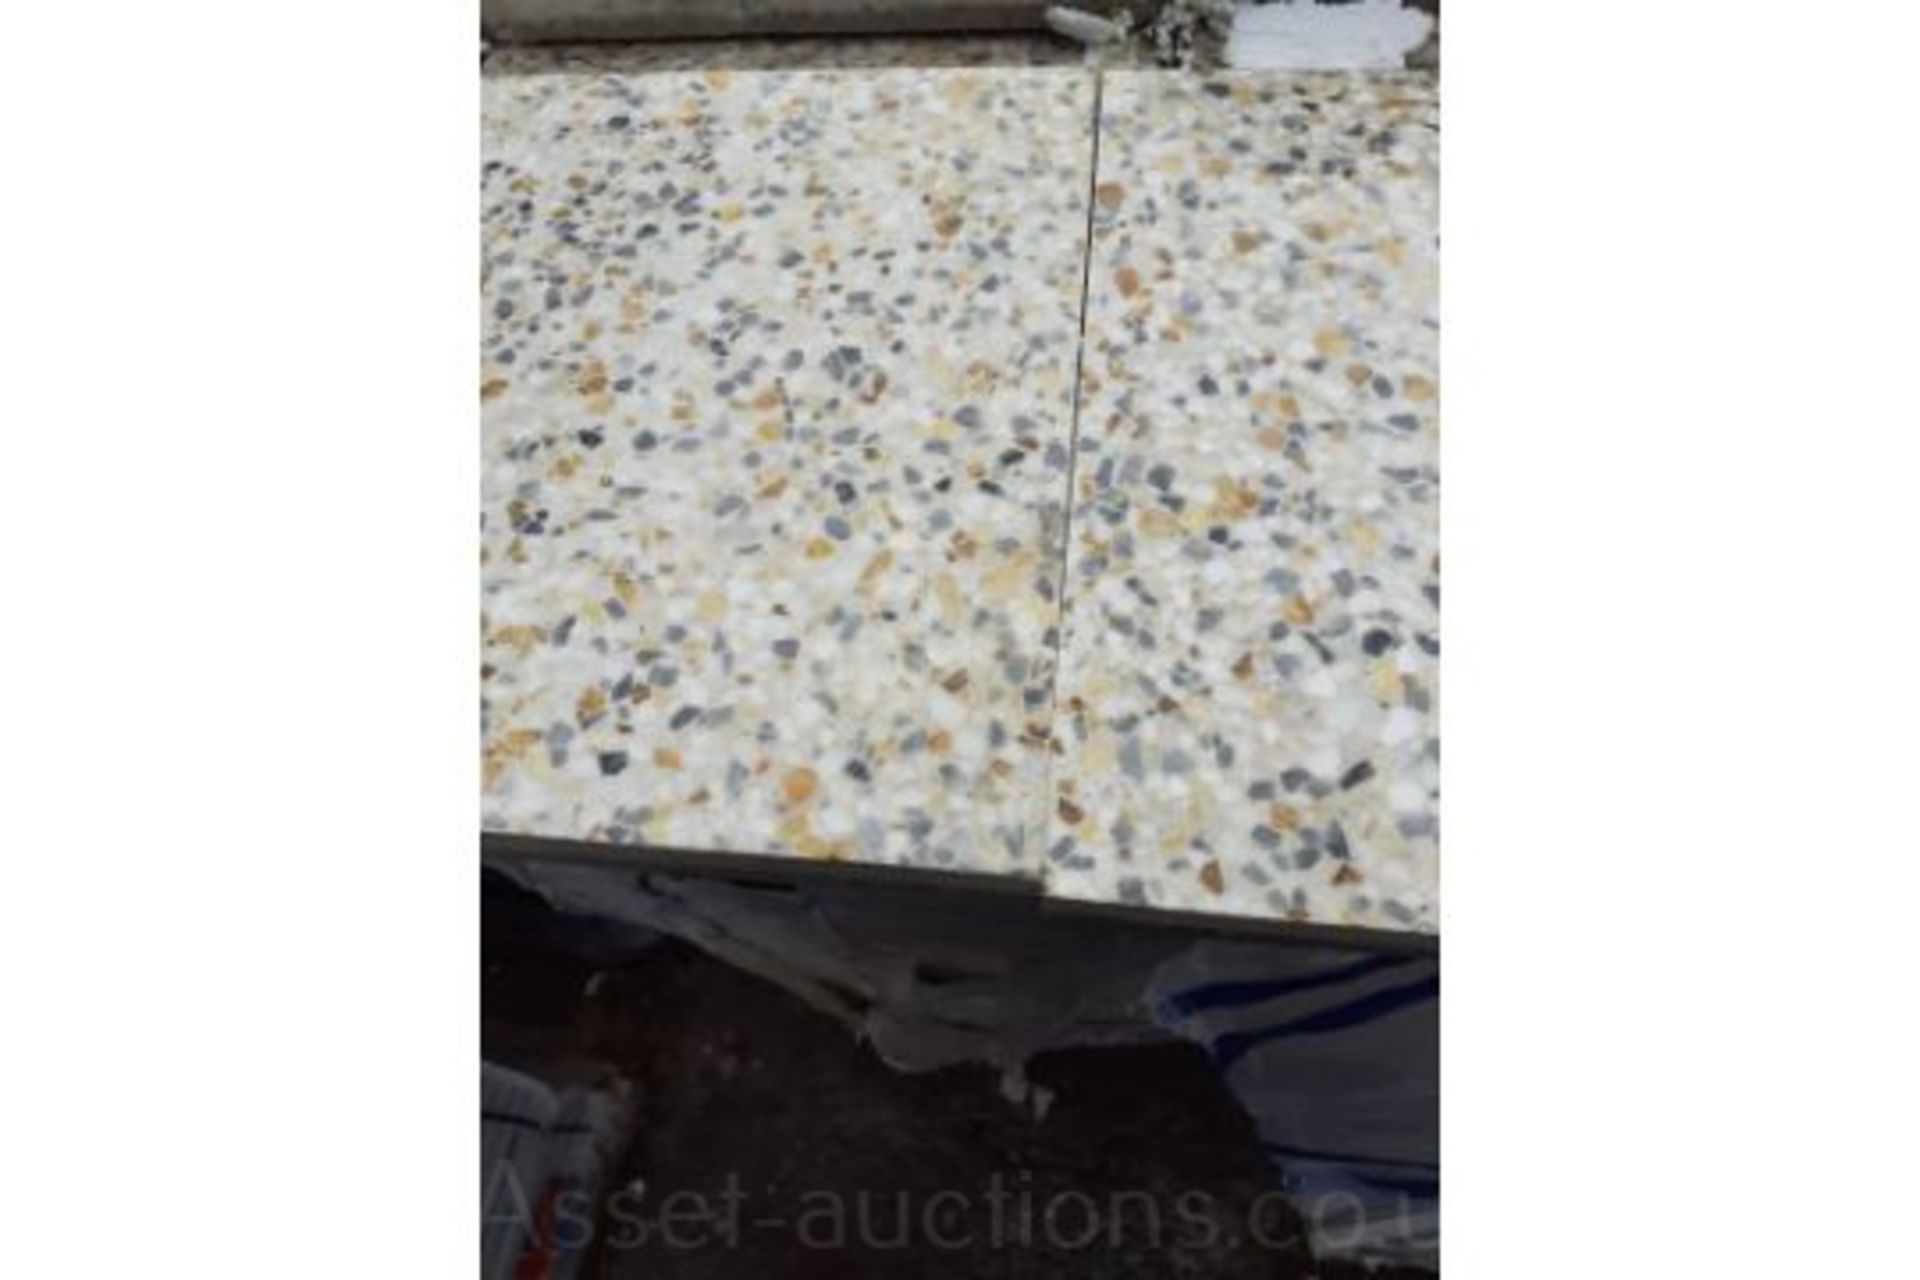 1 PALLET OF BRAND NEW TERRAZZO COMMERCIAL FLOOR TILES (TDE9), COVERS 24 SQUARE YARDS *PLUS VAT* - Image 4 of 6